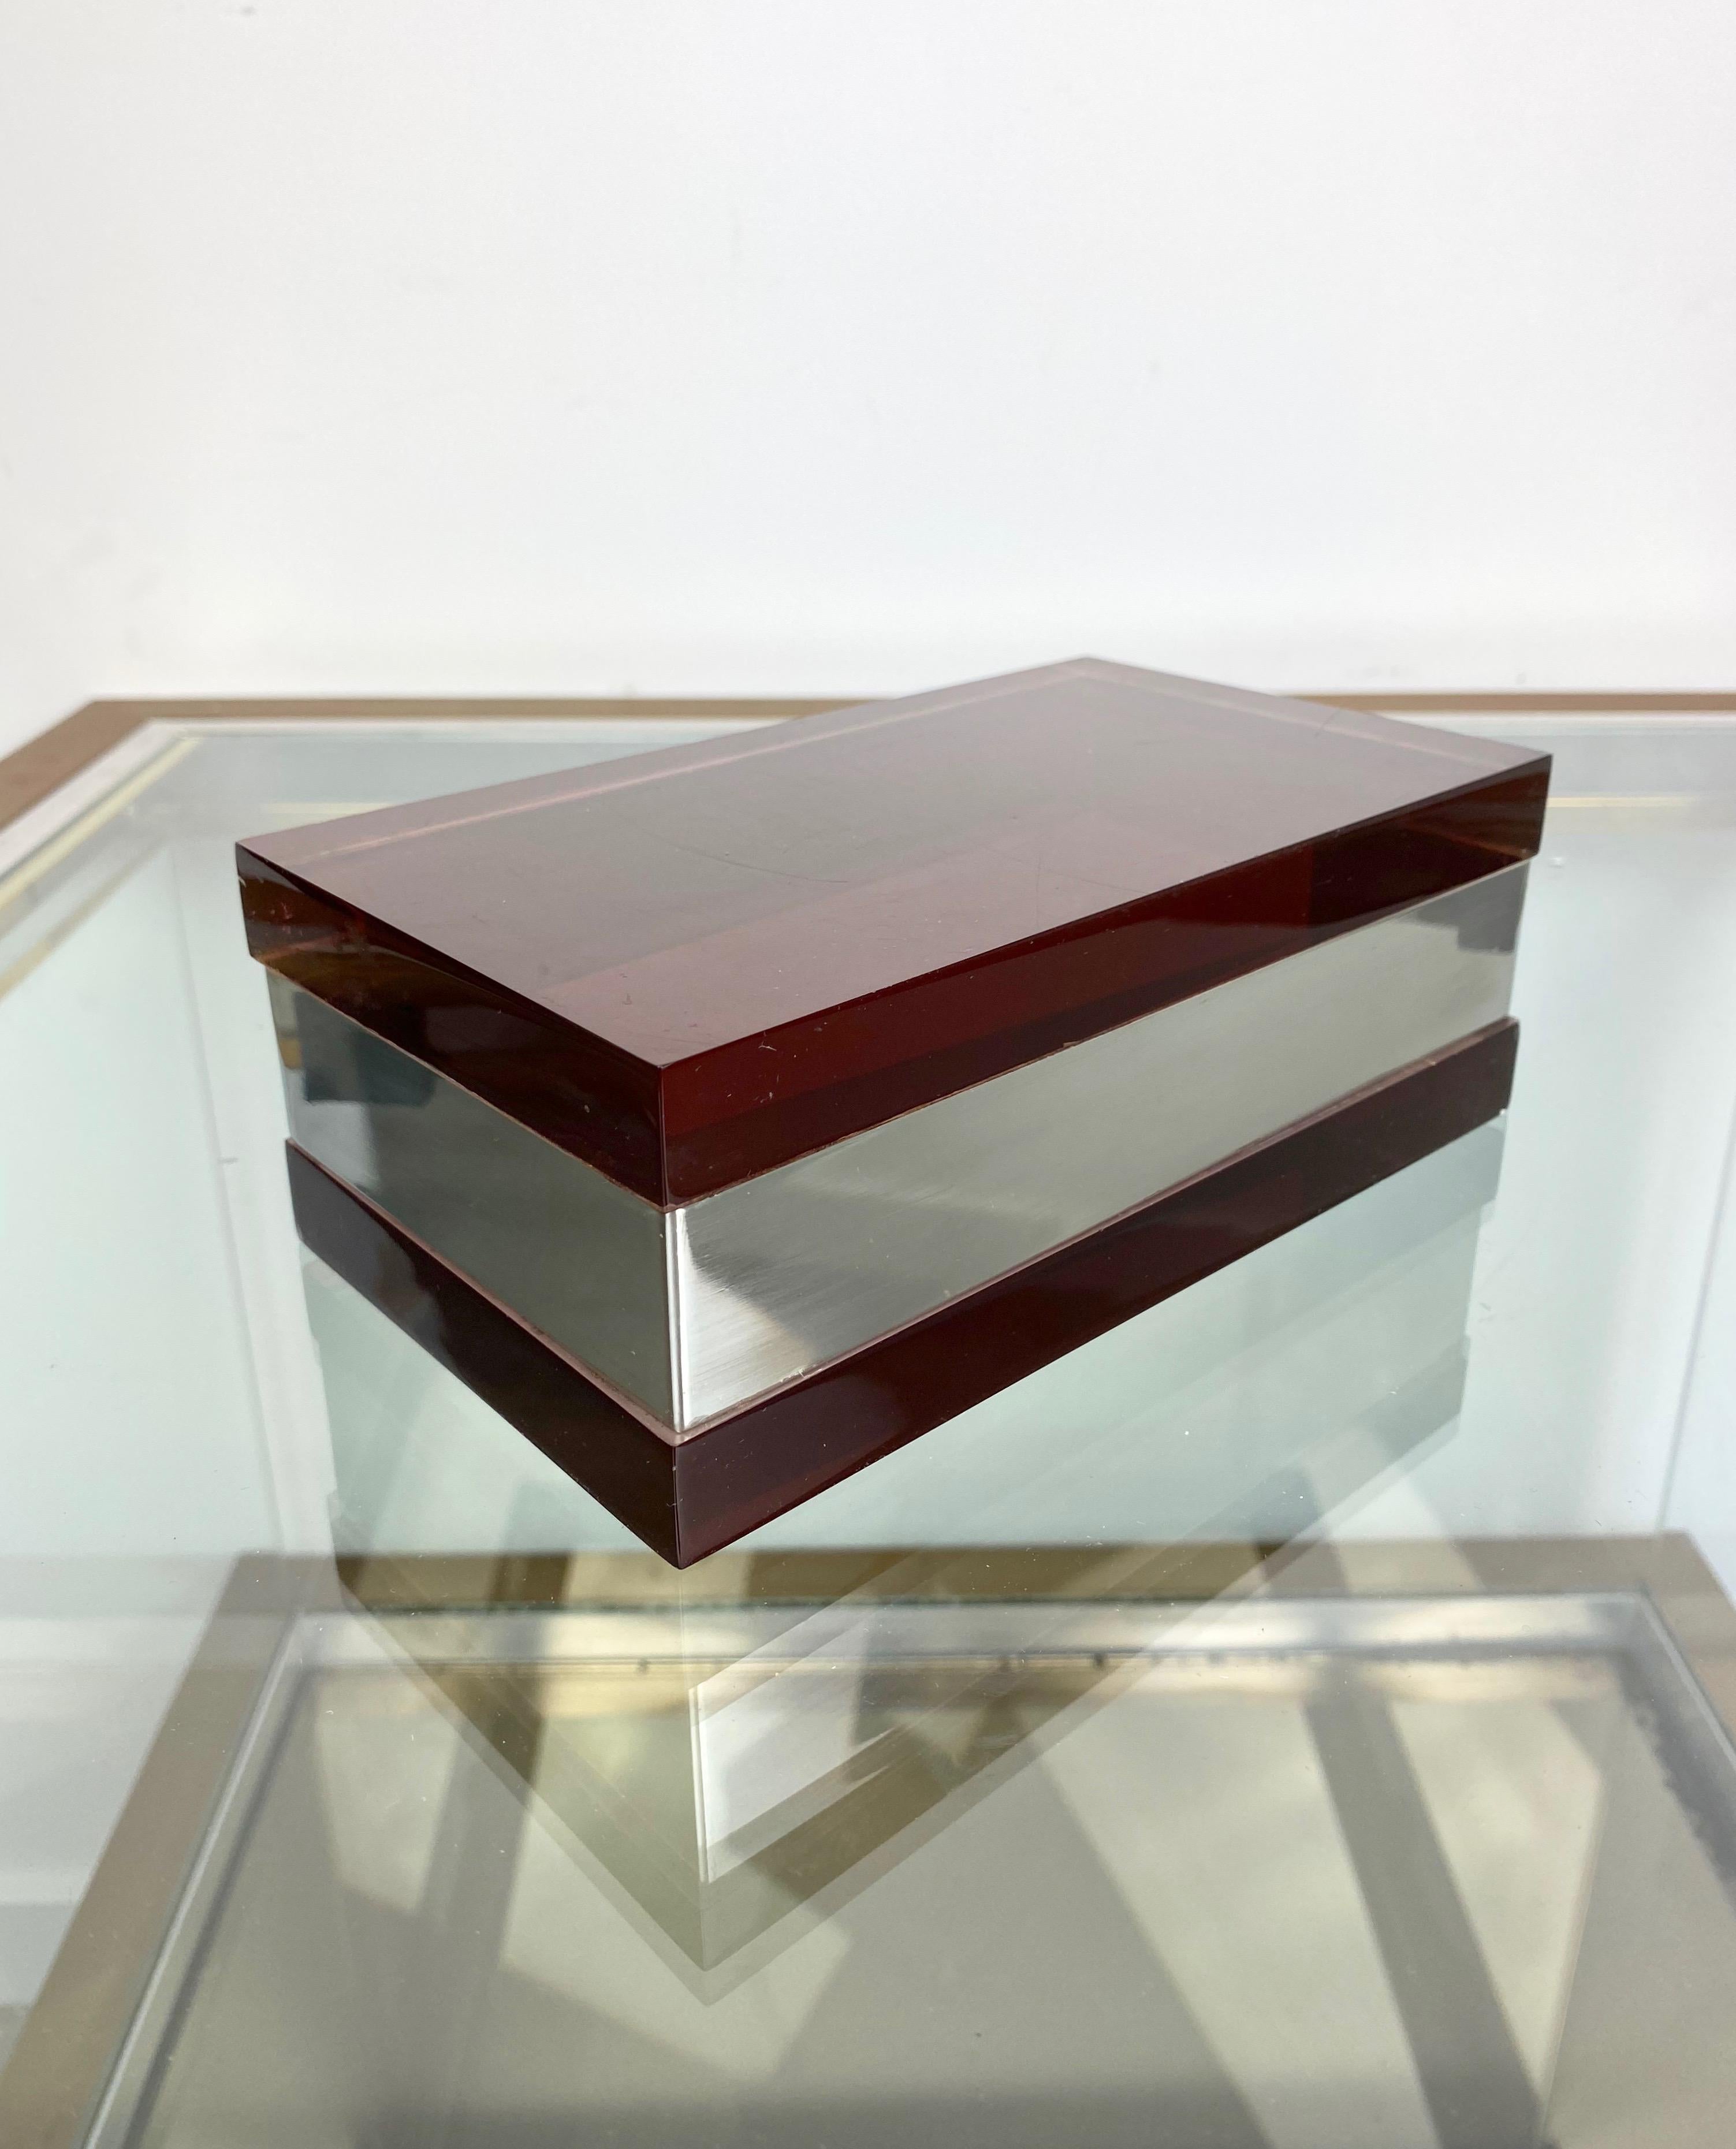 Metal Alessandro Albrizzi Rectangular Box in Purple Lucite and Chrome, Italy, 1970s For Sale